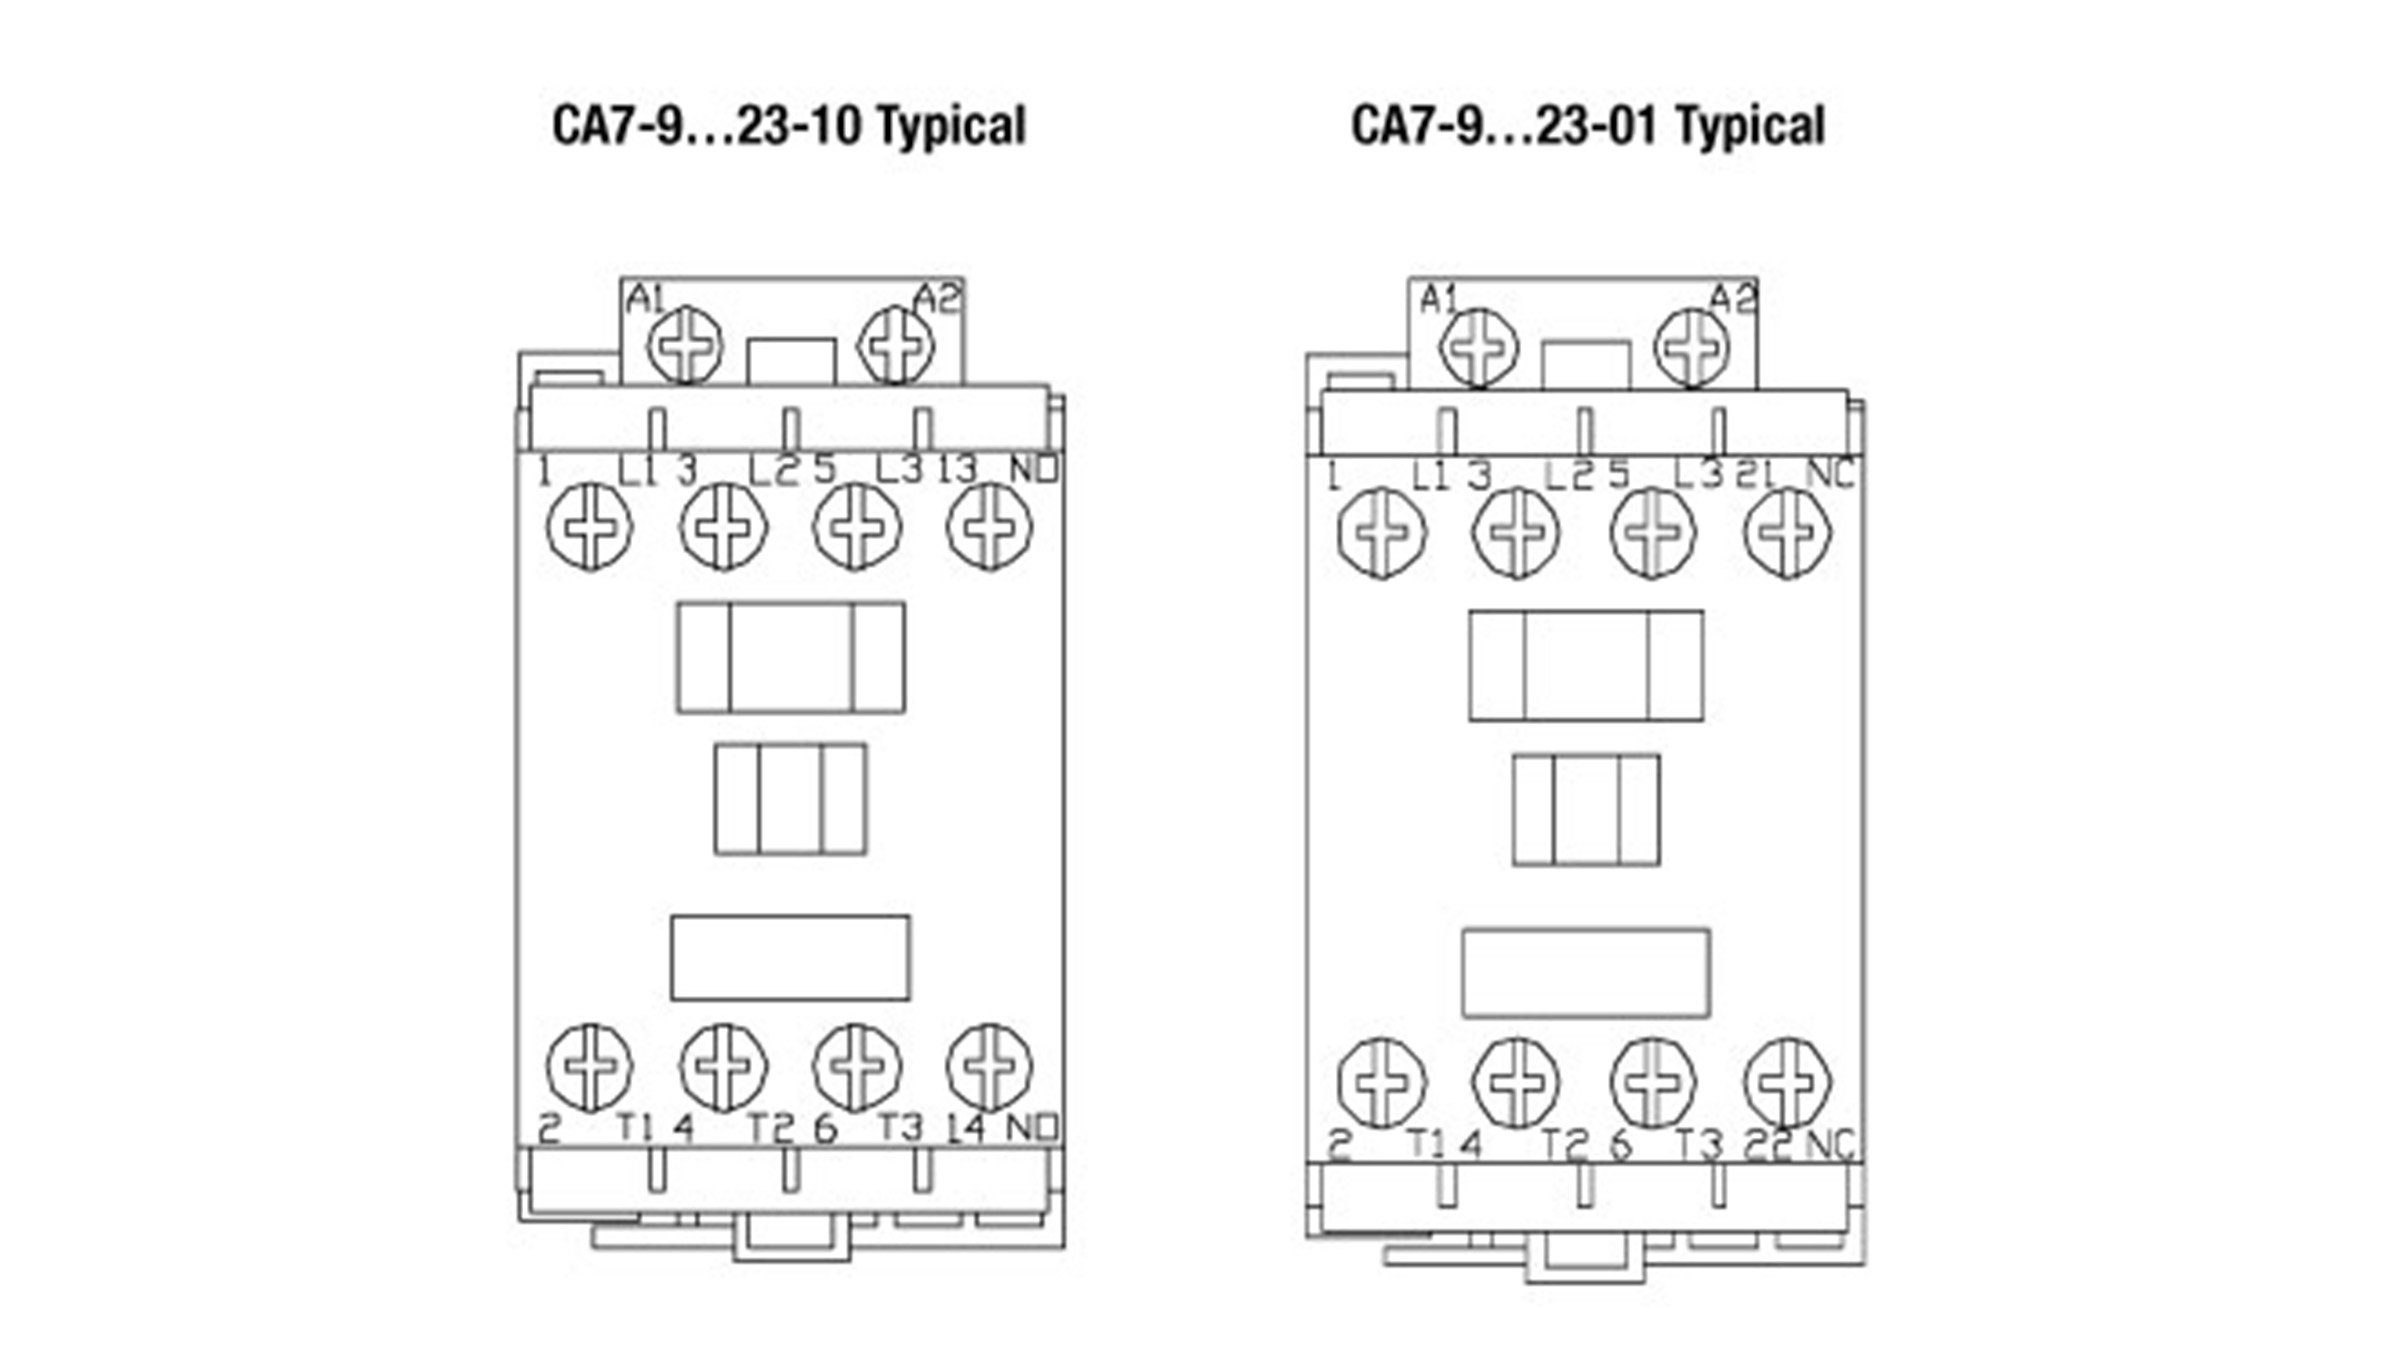 Sprecher & Schuh Series CA7 auxiliary contact markings on 9 to 23 amp contactors